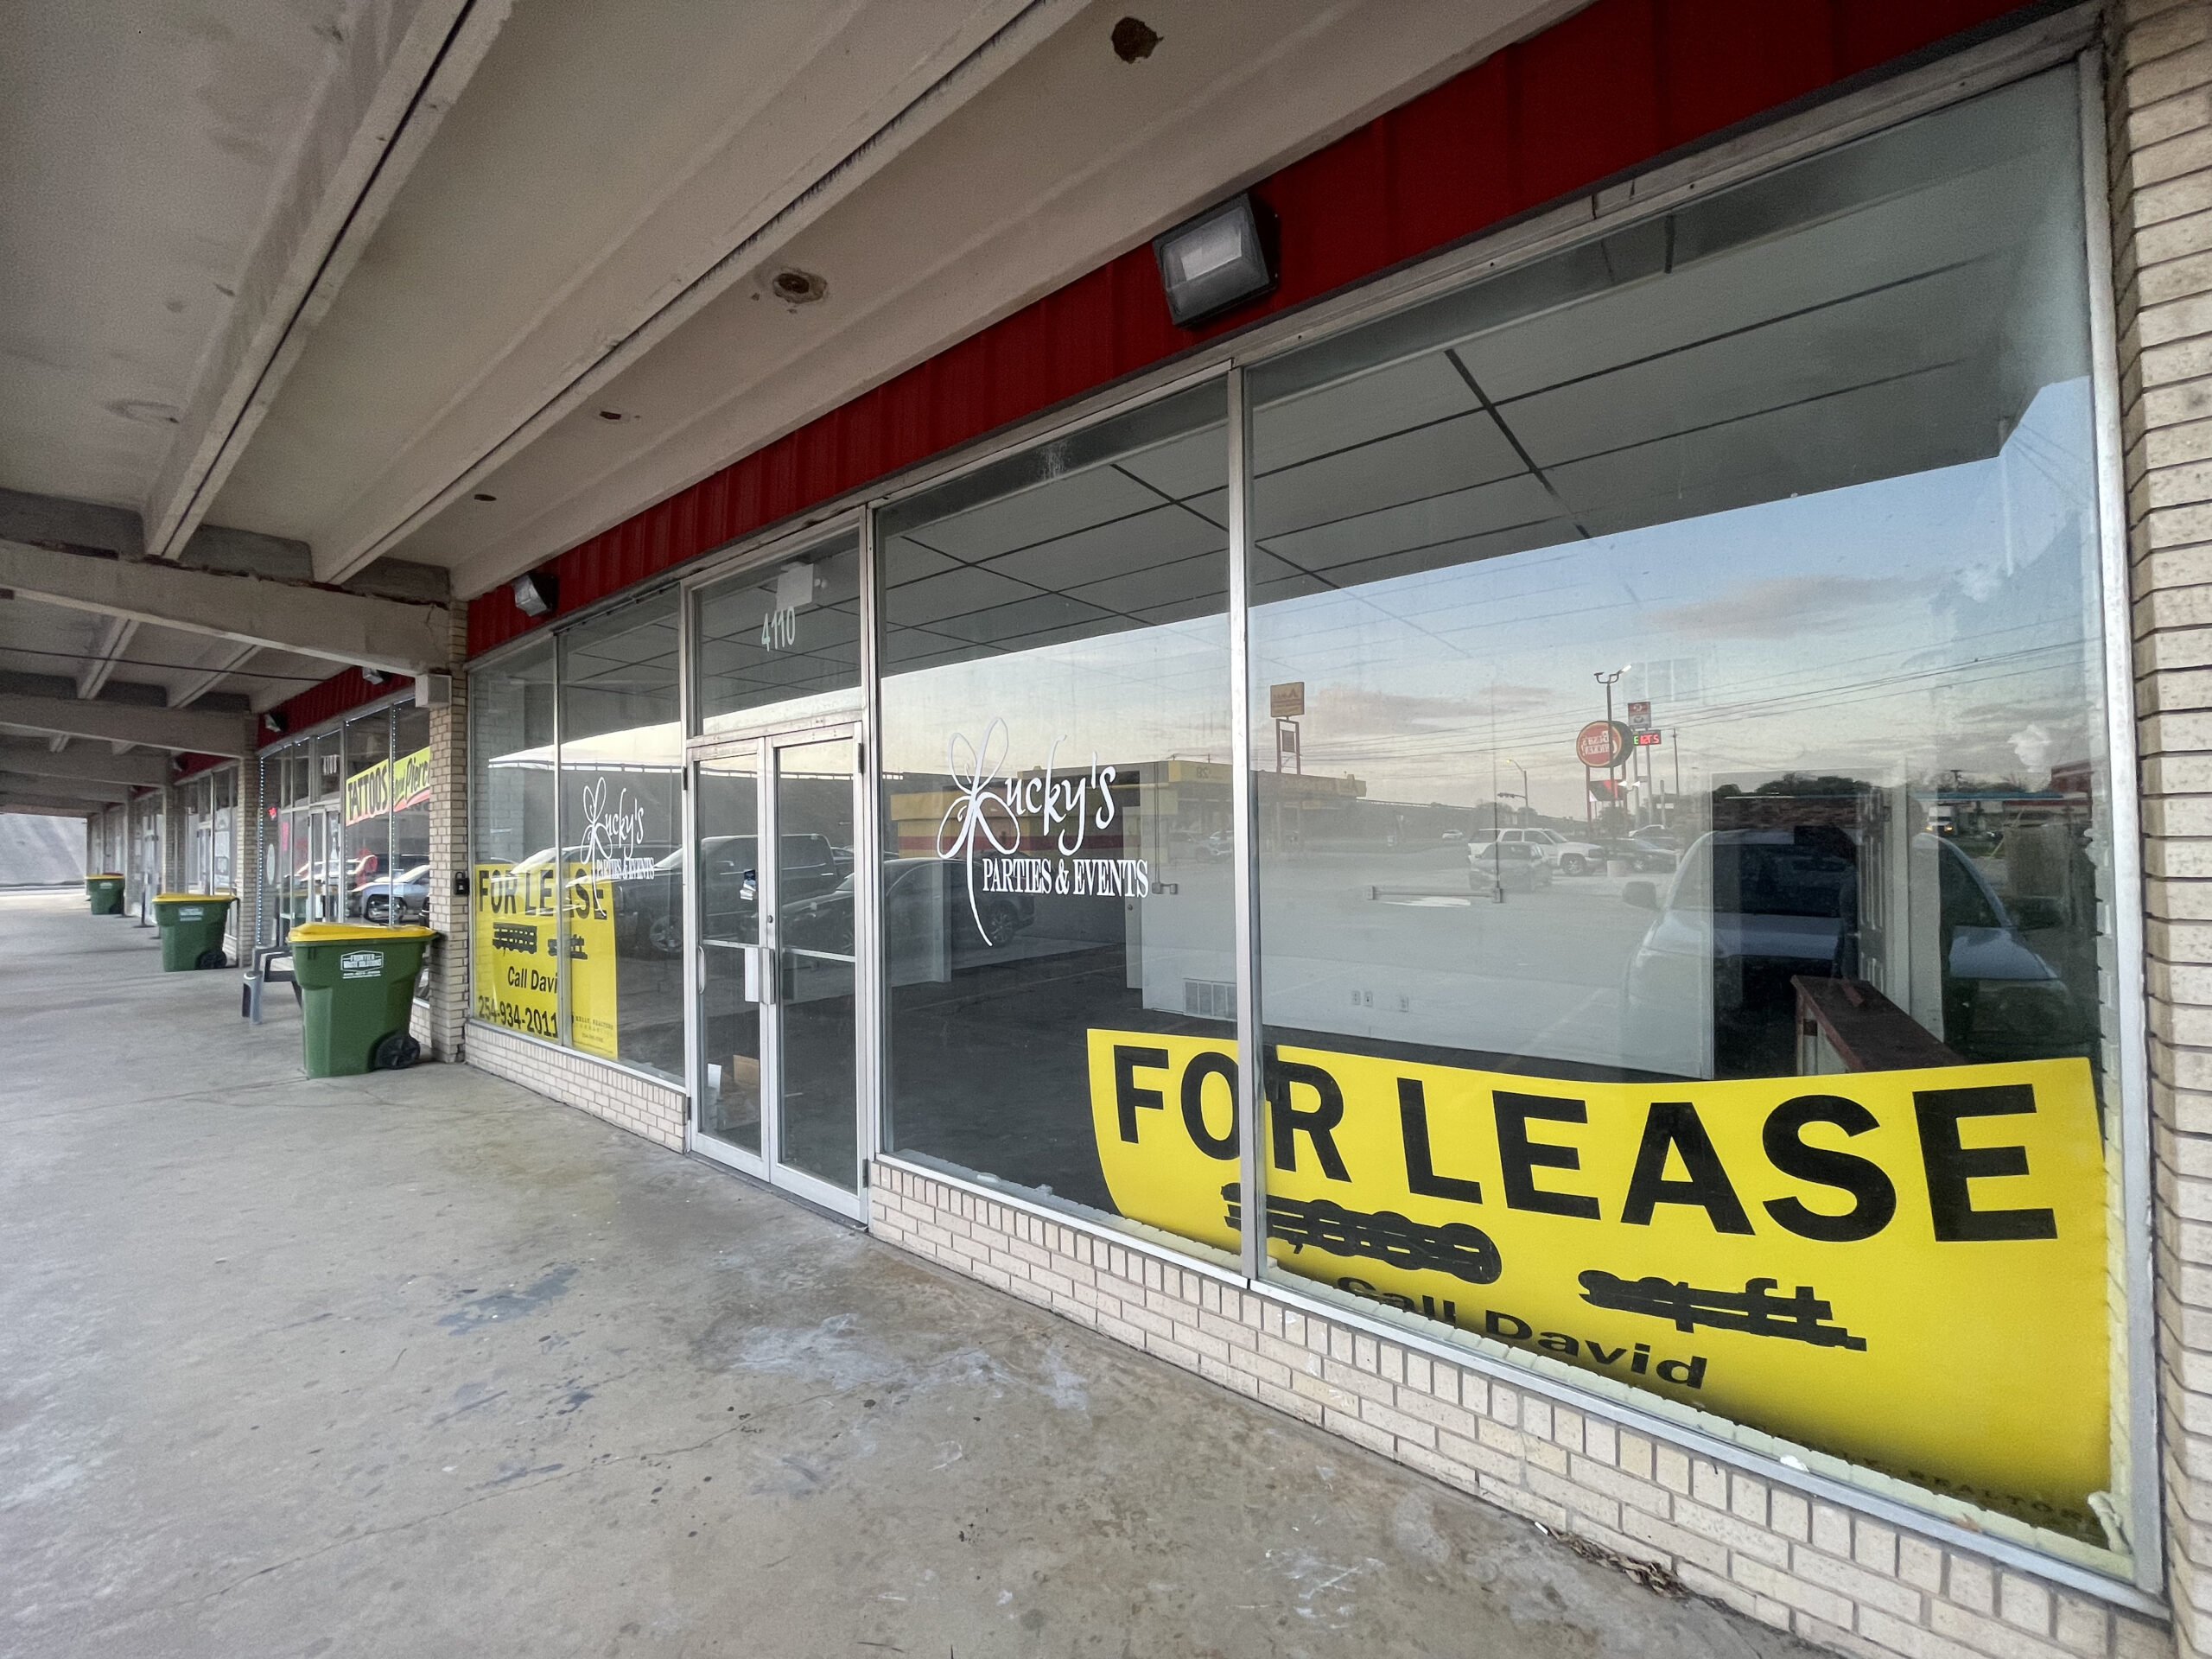 exterior facade under awning of retail space with large windows and doors with brick outline and red accents with yellow for lease sign in window